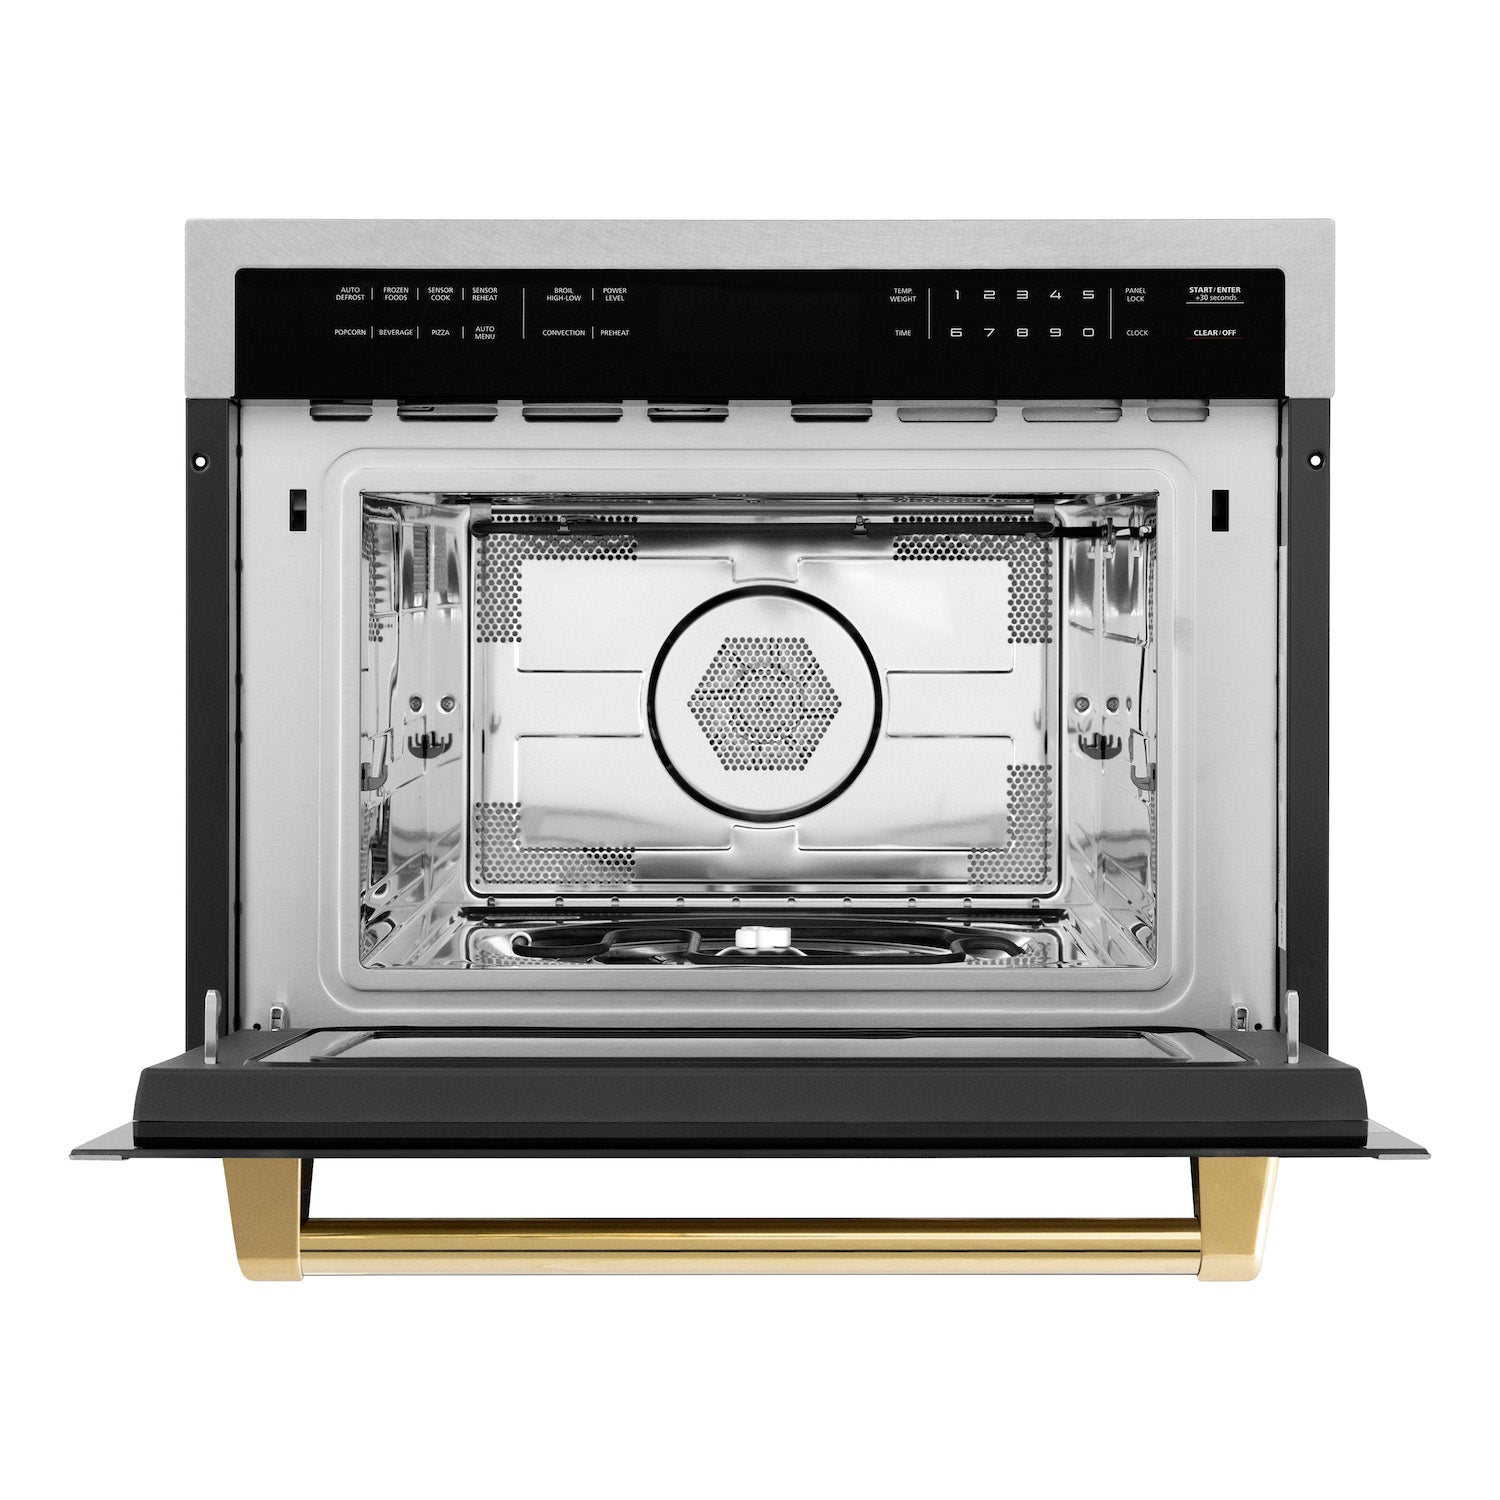 ZLINE Autograph Edition 24 in. 1.6 cu ft. Built-in Convection Microwave Oven in DuraSnow Stainless Steel with Polished Gold Accents front with door open.